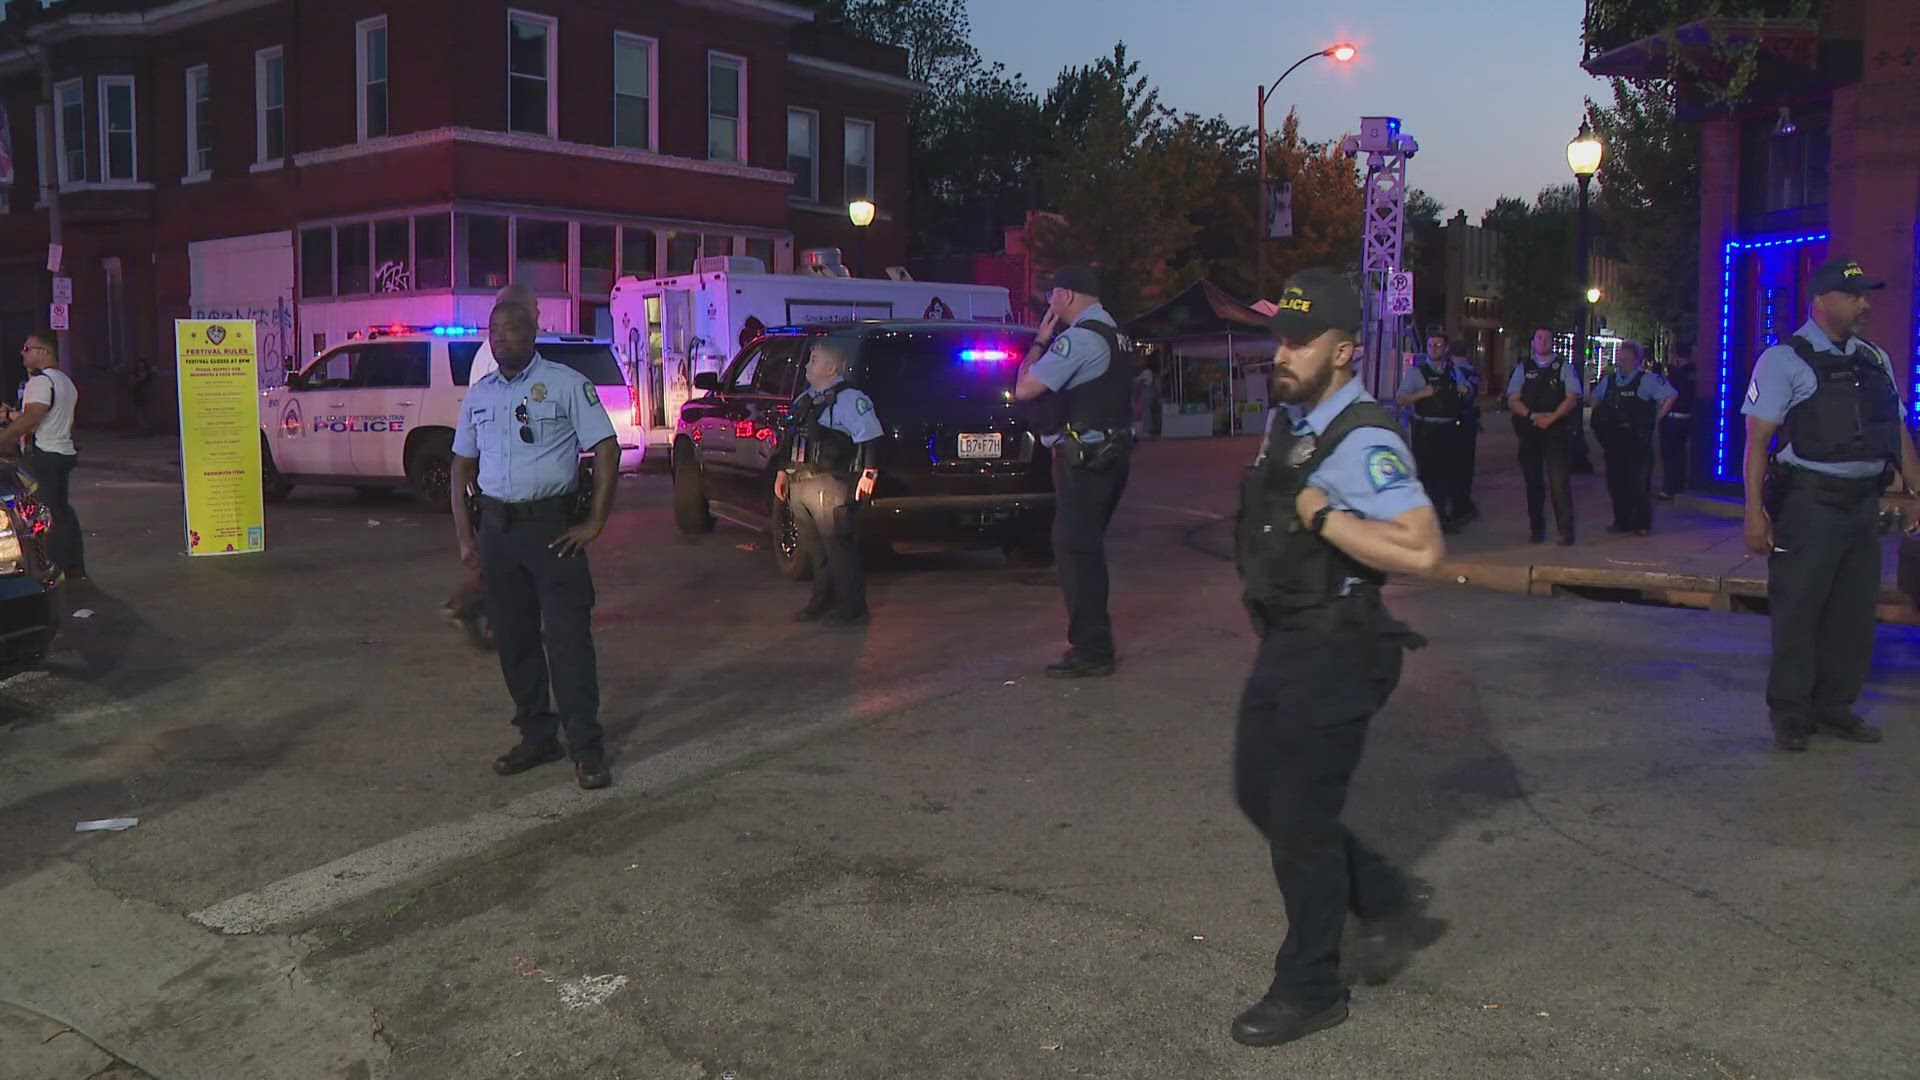 The annual event on Cherokee Street brings tens of thousands of people to south St. Louis every year. Two shootings surrounded last year's event.